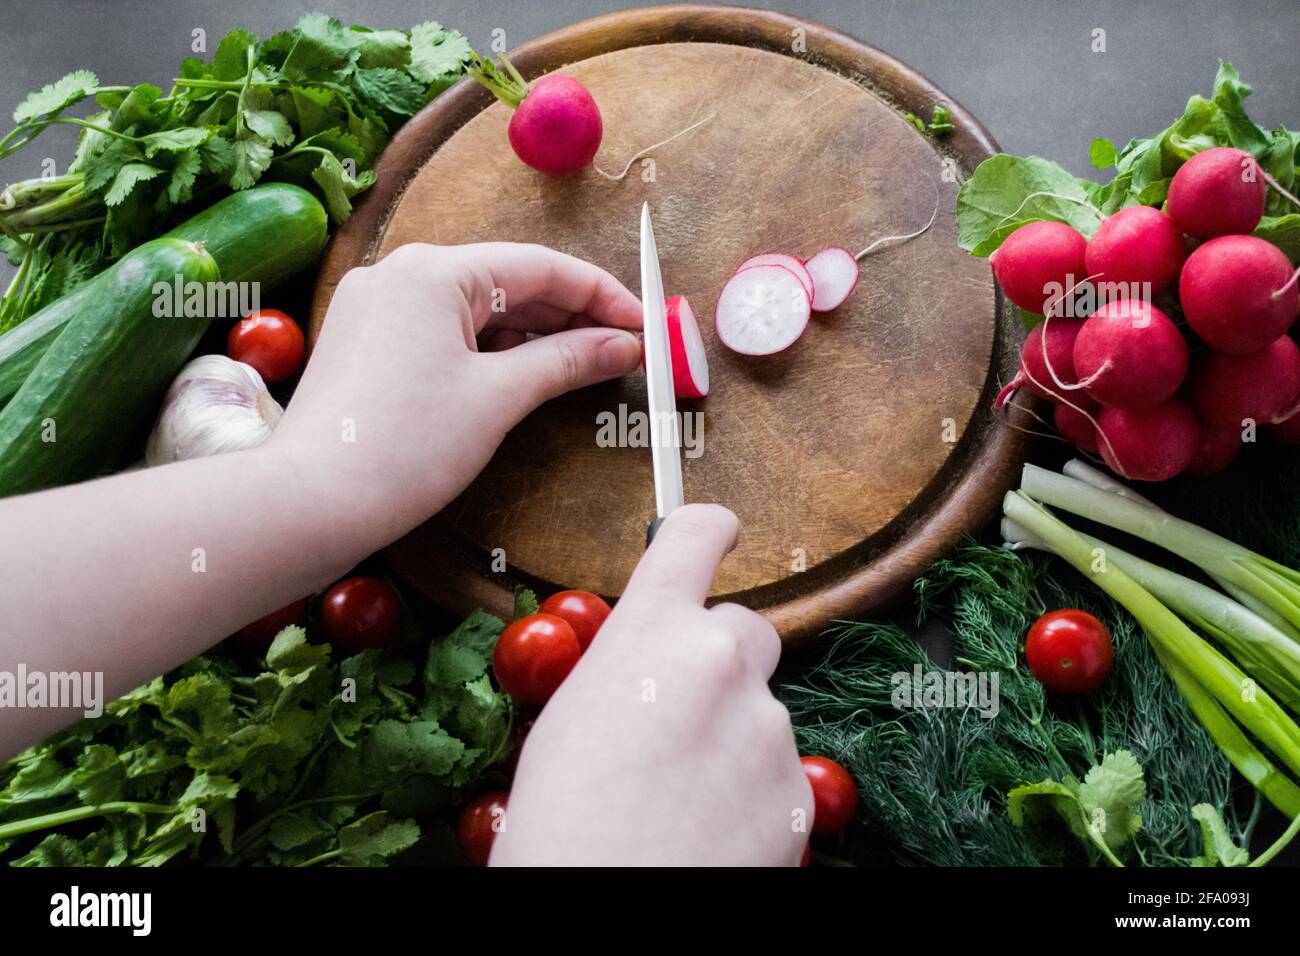 Hands cutting radishes with a white ceramic knife on a round wooden chopping board. Around the board are ripe fresh vegetables: tomatoes, onions, cucu Stock Photo